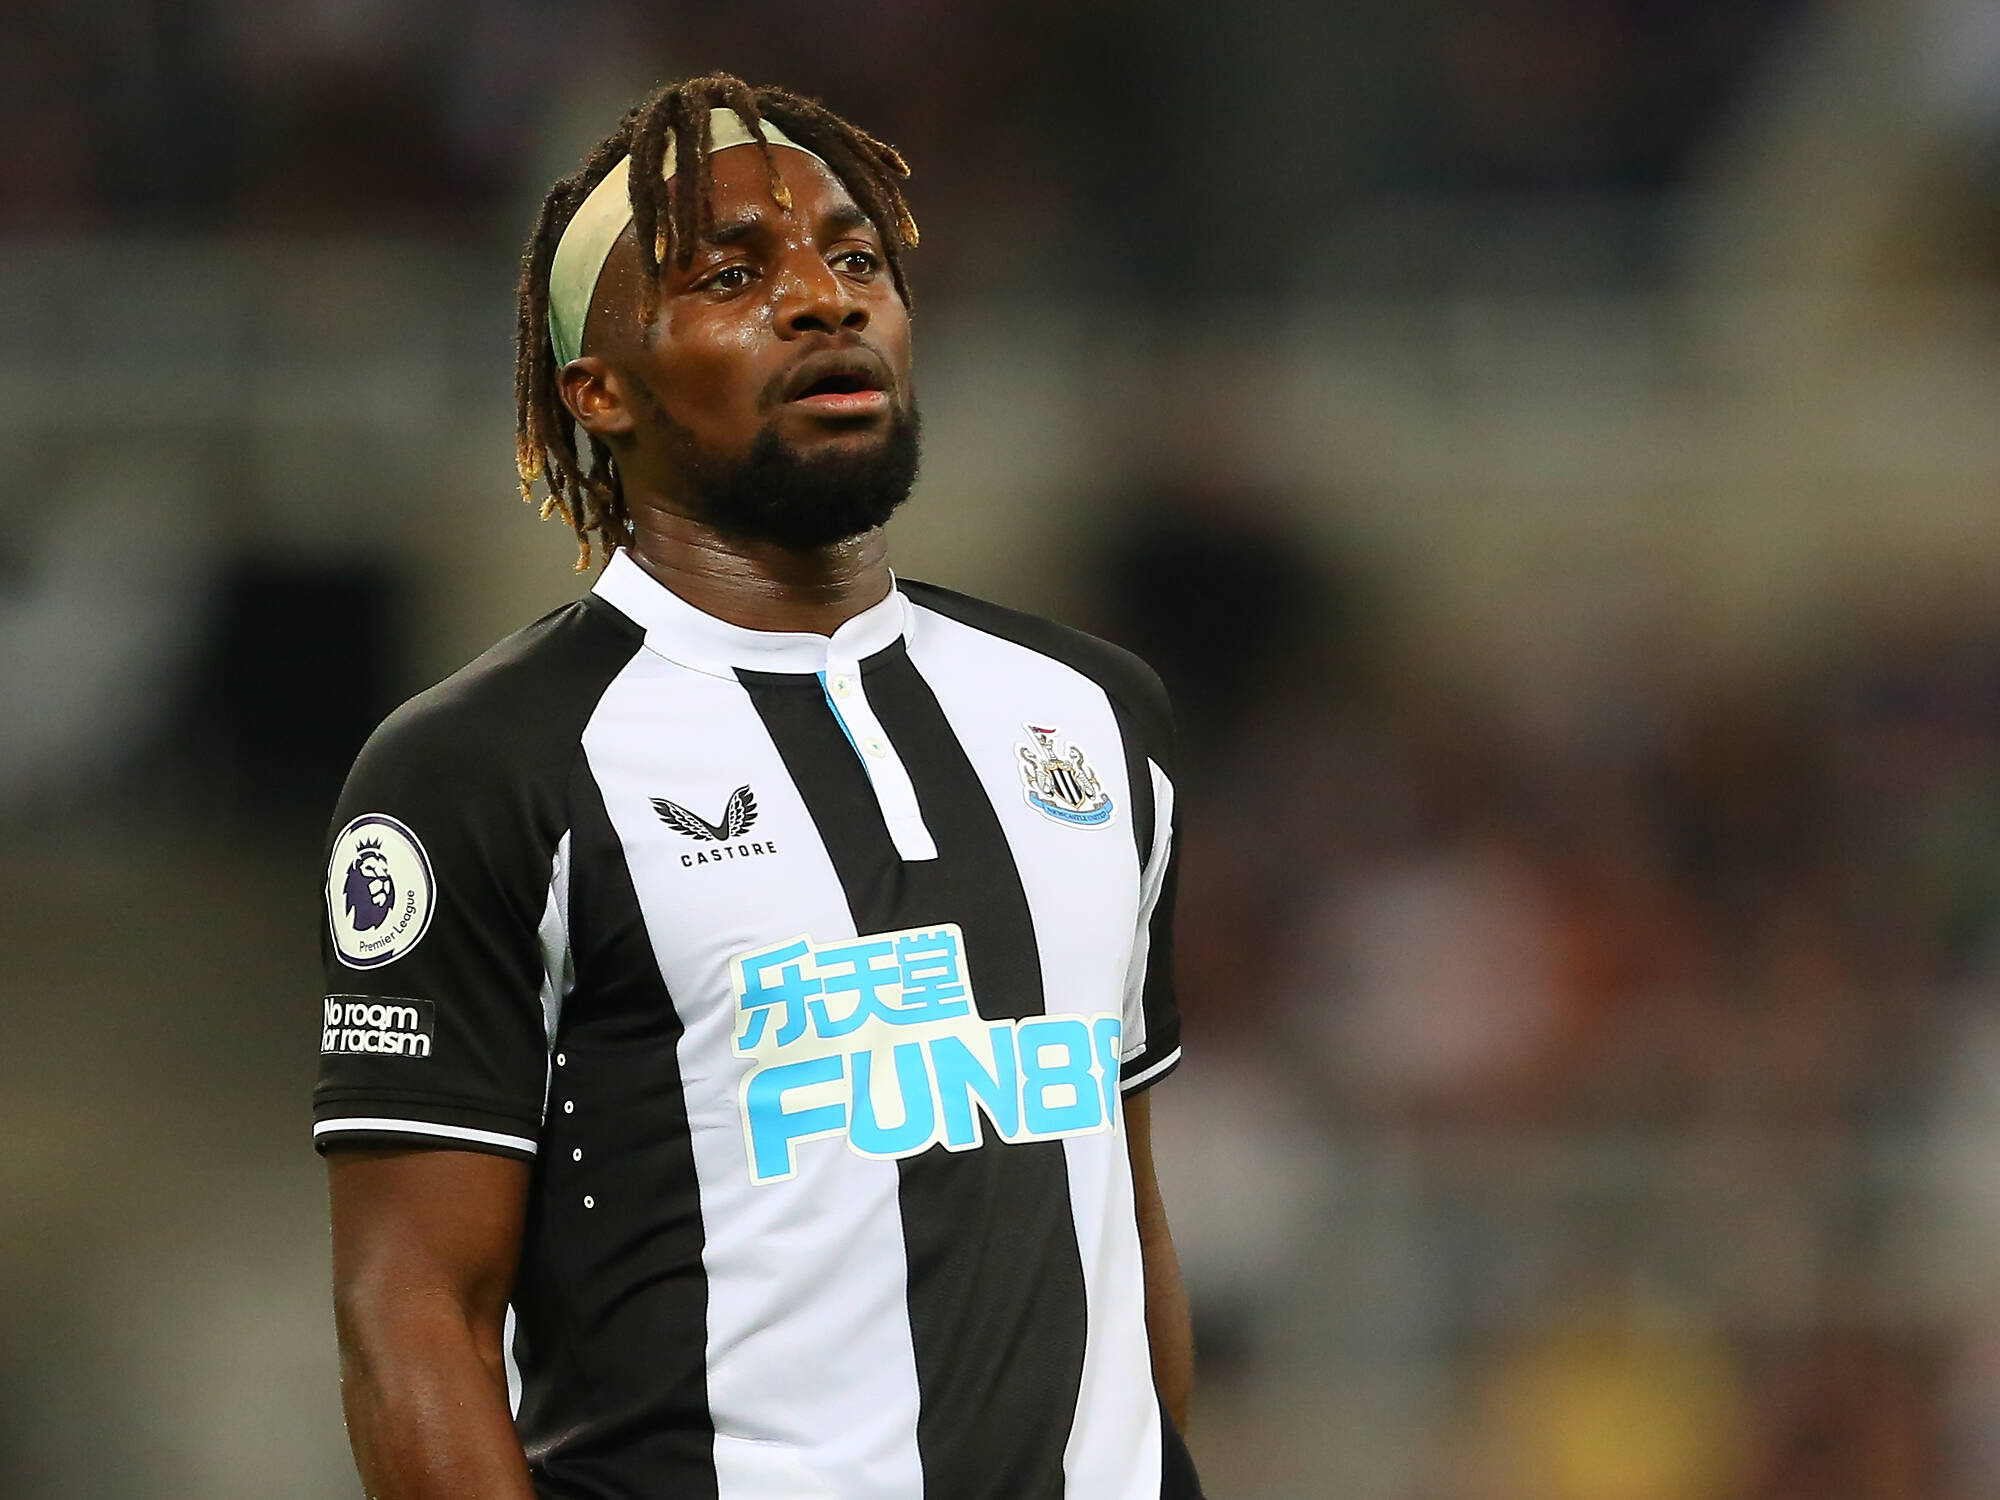 NEWCASTLE UPON TYNE, ENGLAND – SEPTEMBER 17: Allan Saint-Maximin of Newcastle United during the Premier League match bet